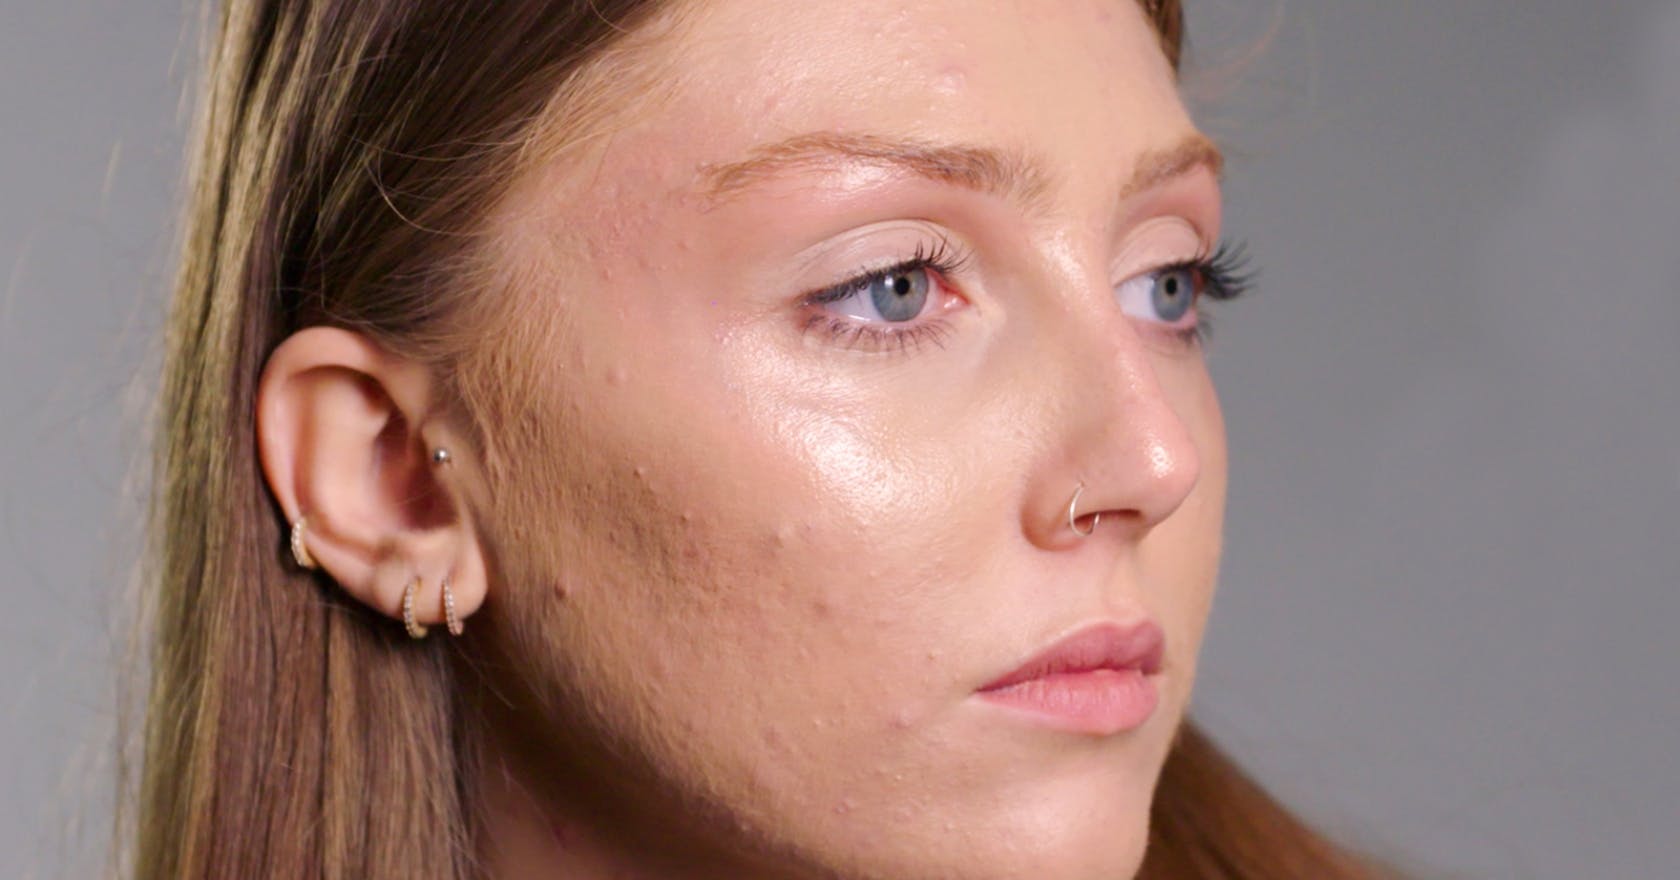 Acne needs to be normalised, says skin positivy campaigner